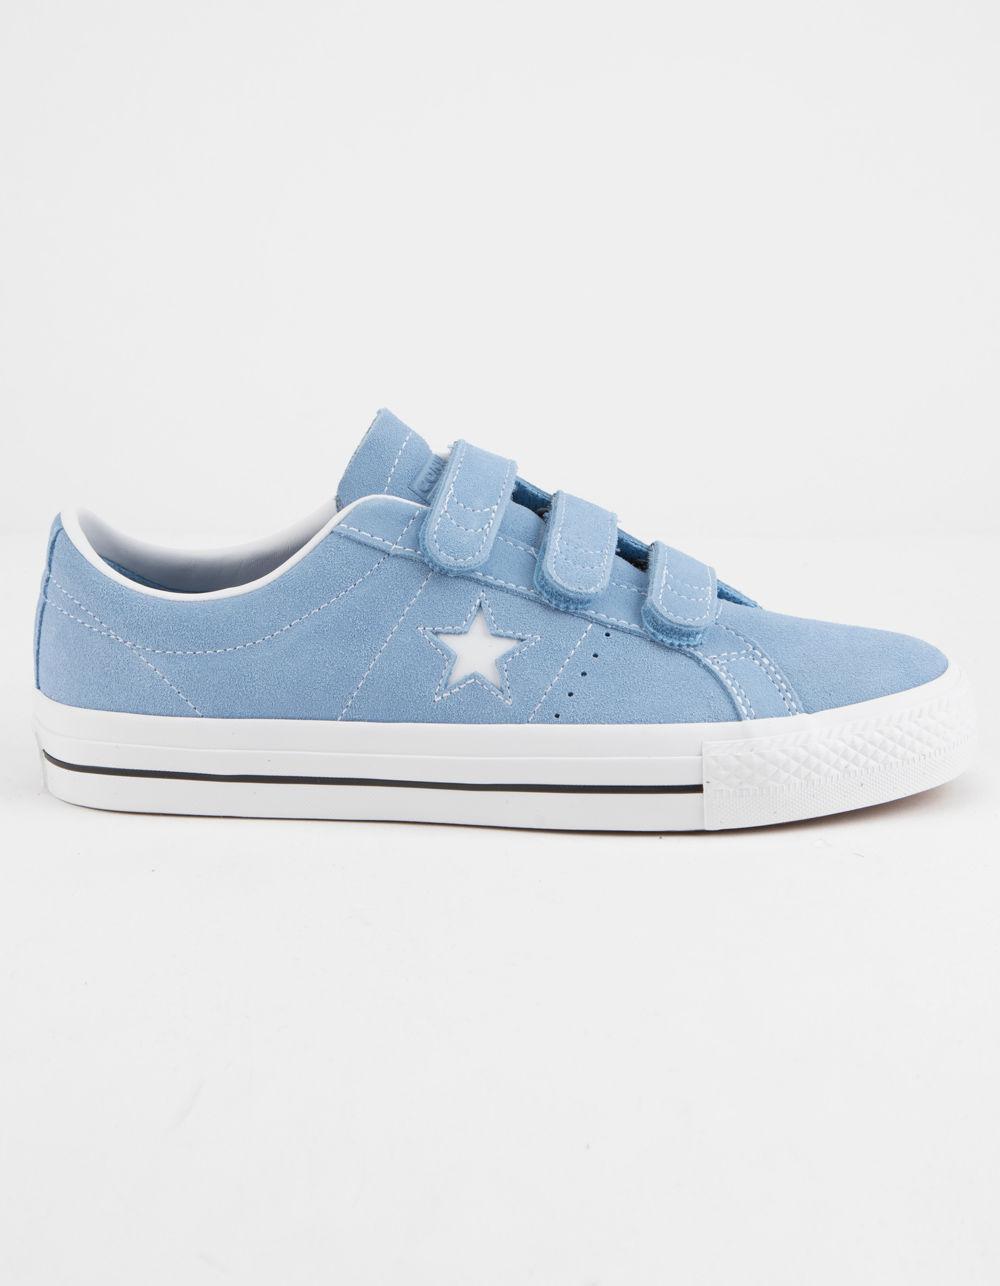 Converse Suede One Star Pro 3v Ox Shoes in Light Blue/Navy/White (Blue) for  Men - Lyst